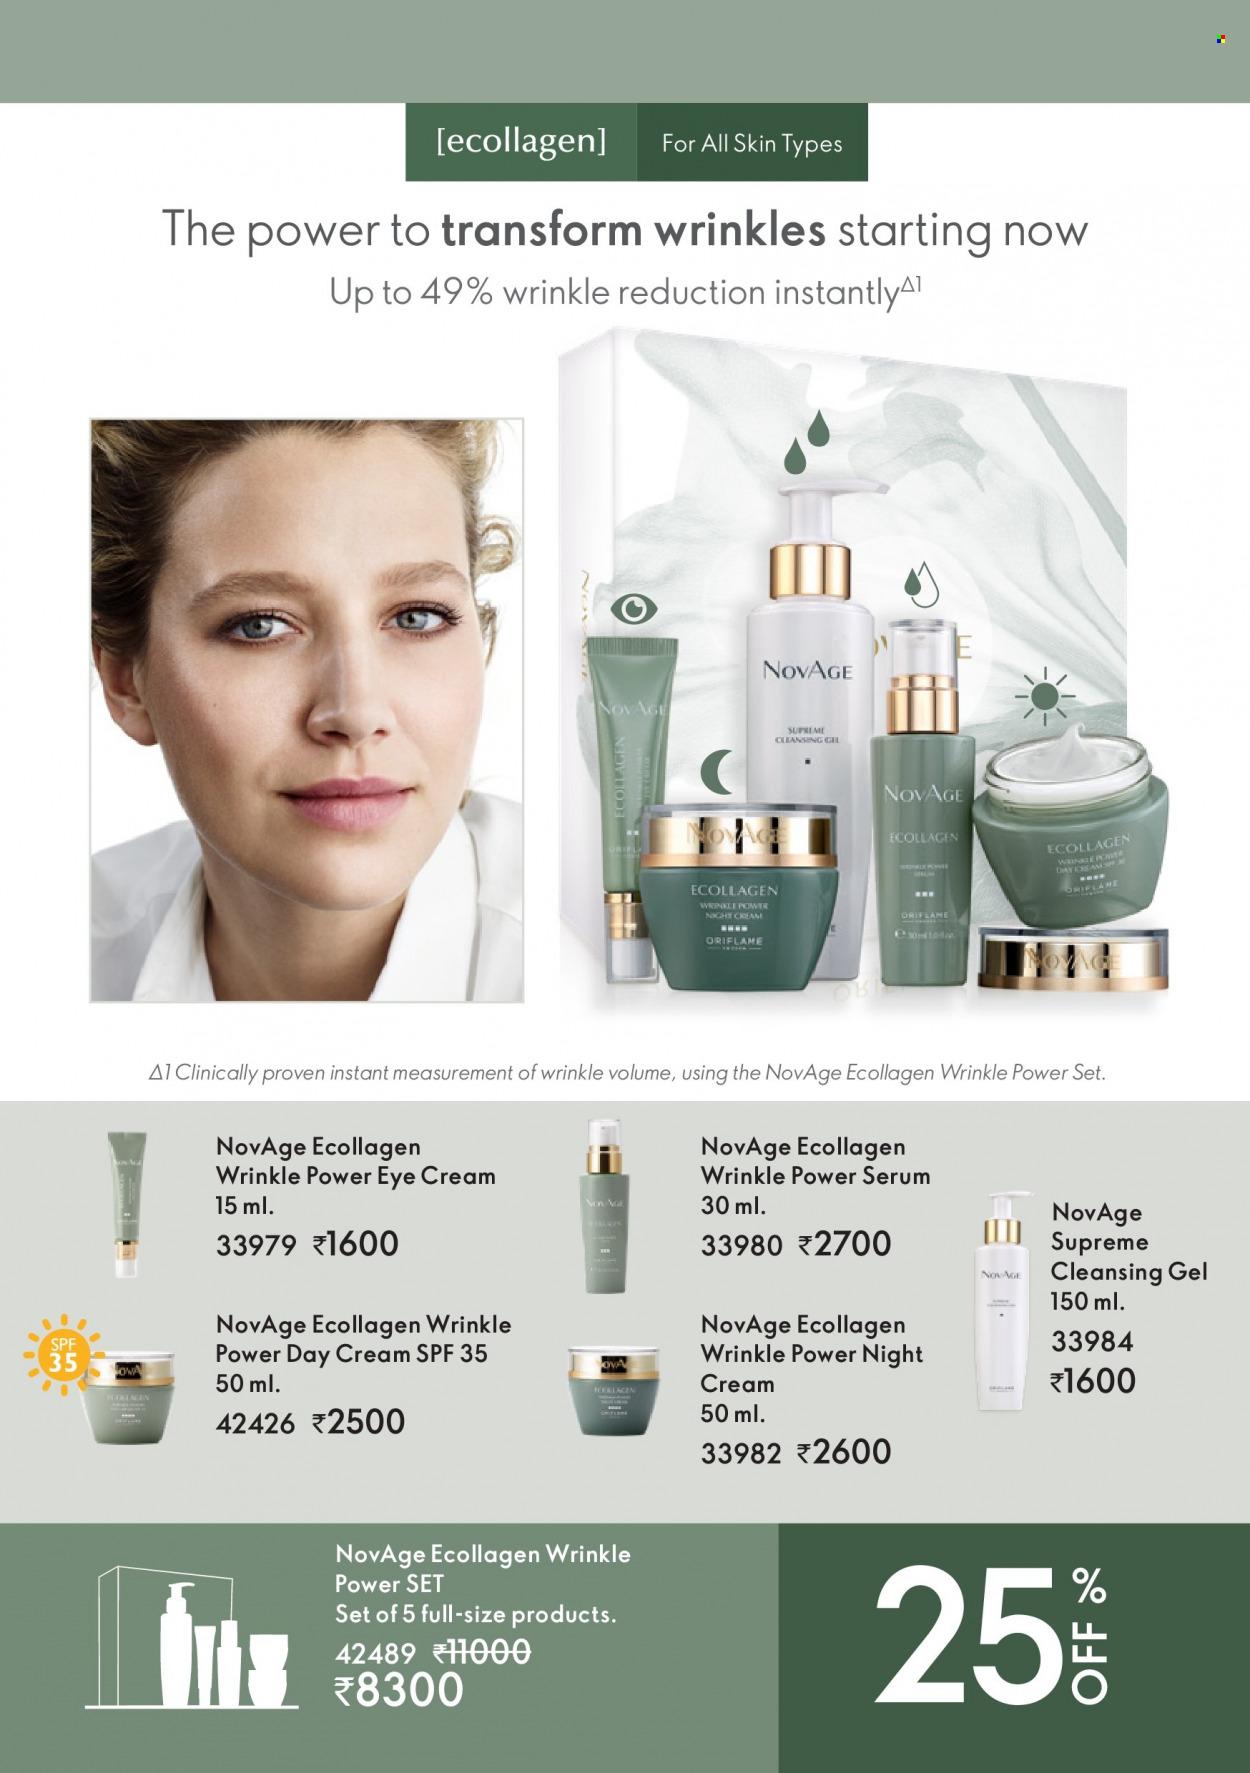 Oriflame offer - 01.02.2023 - 28.02.2023